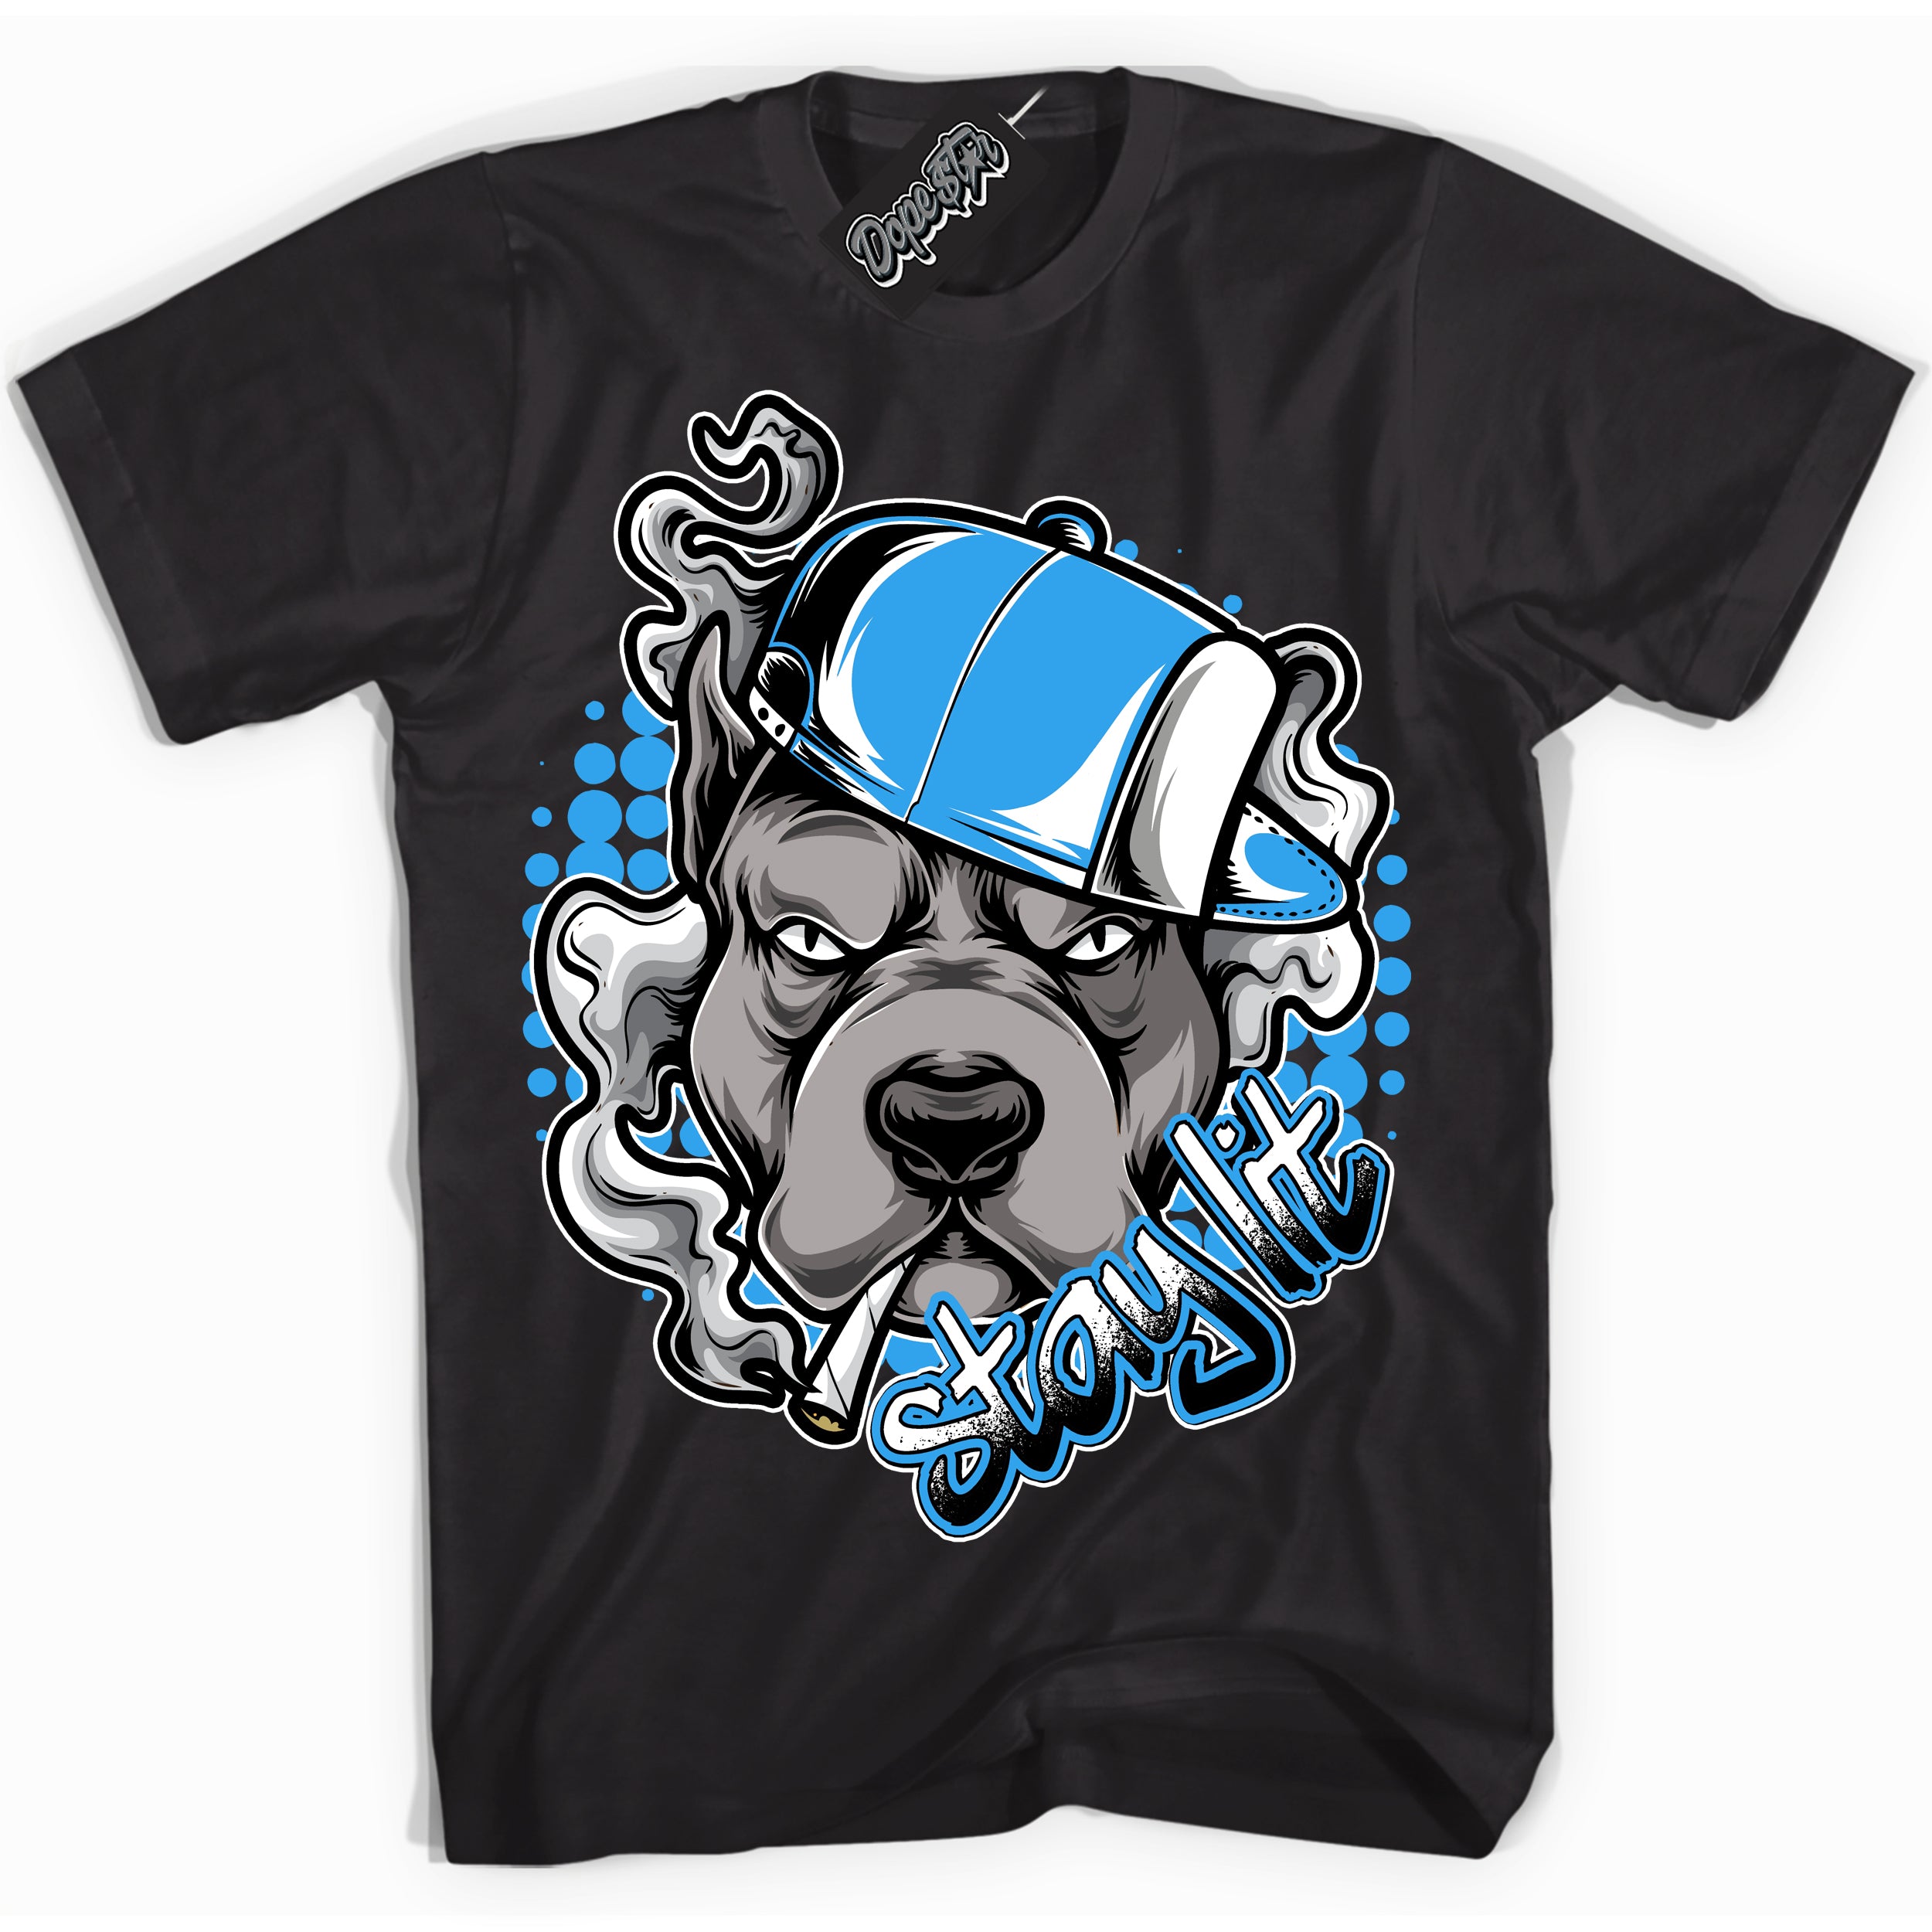 Cool Black graphic tee with “ Stay Lit ” design, that perfectly matches Powder Blue 9s sneakers 